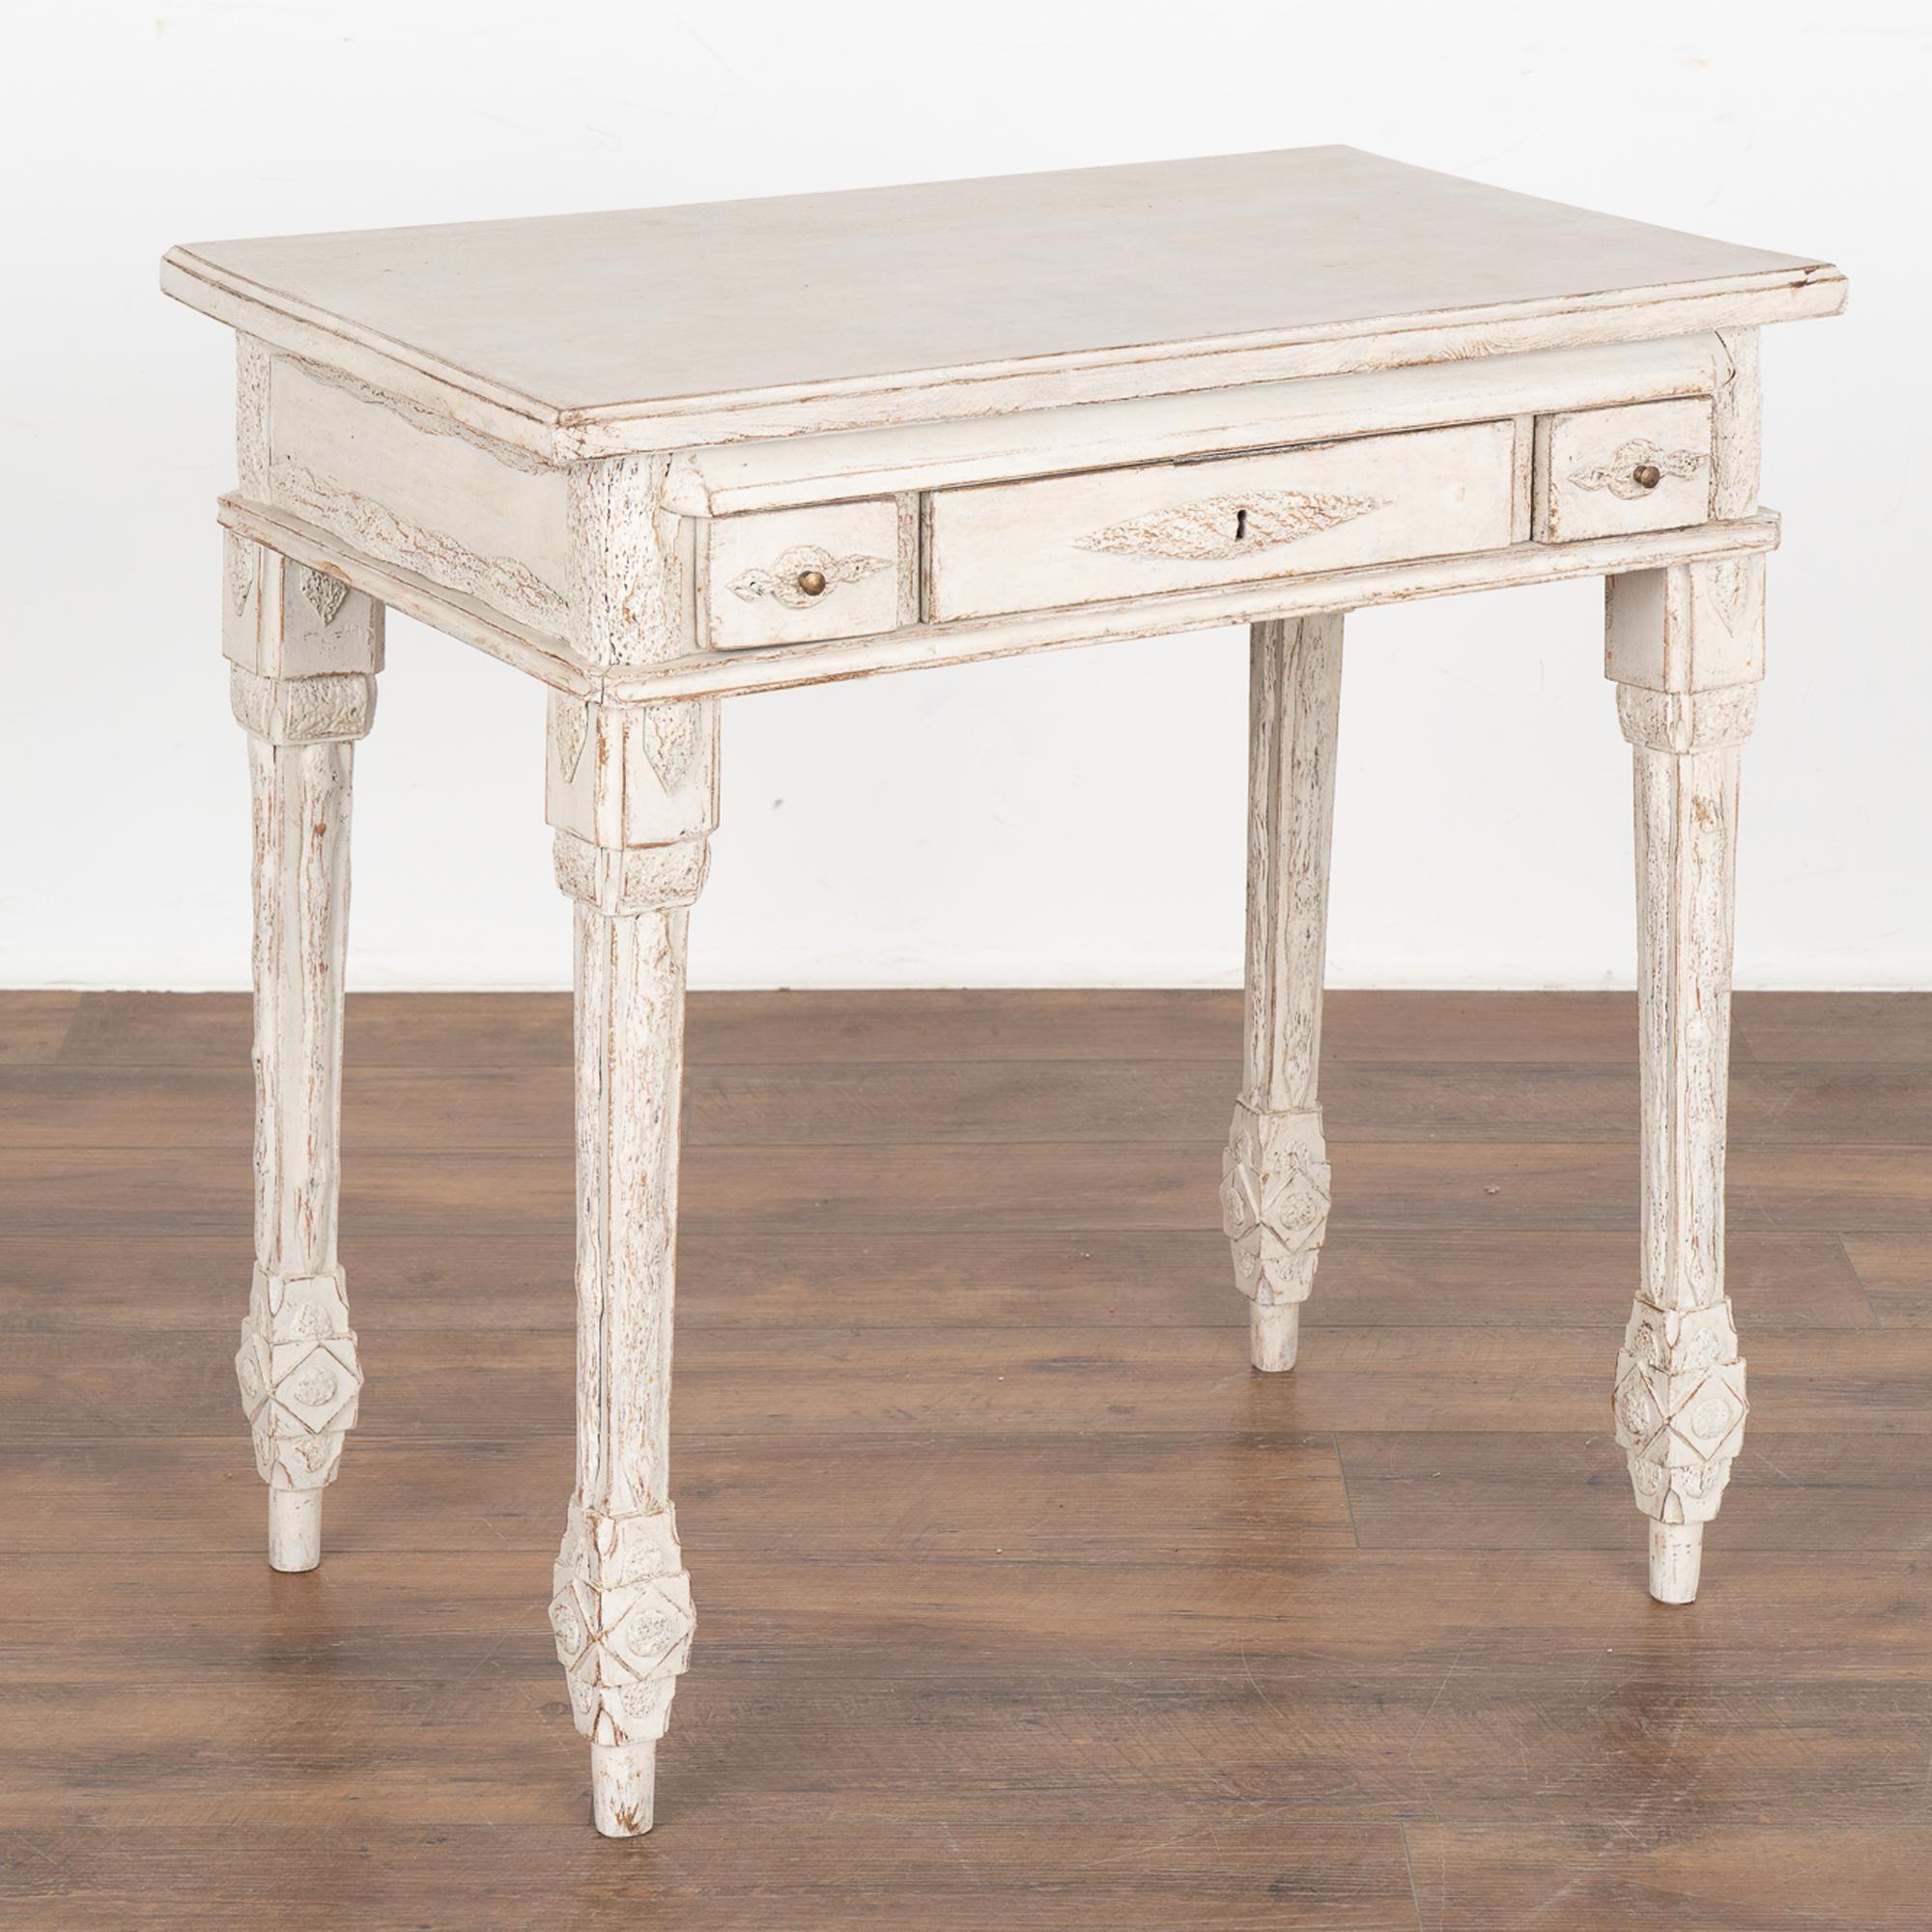 Swedish country pine side table with three drawers. The unique folk art embellishments on this small console table are faux wood. See the detailed photos to appreciate the areas that resemble wood bark along the legs, sides, and each drawer.
Drawers